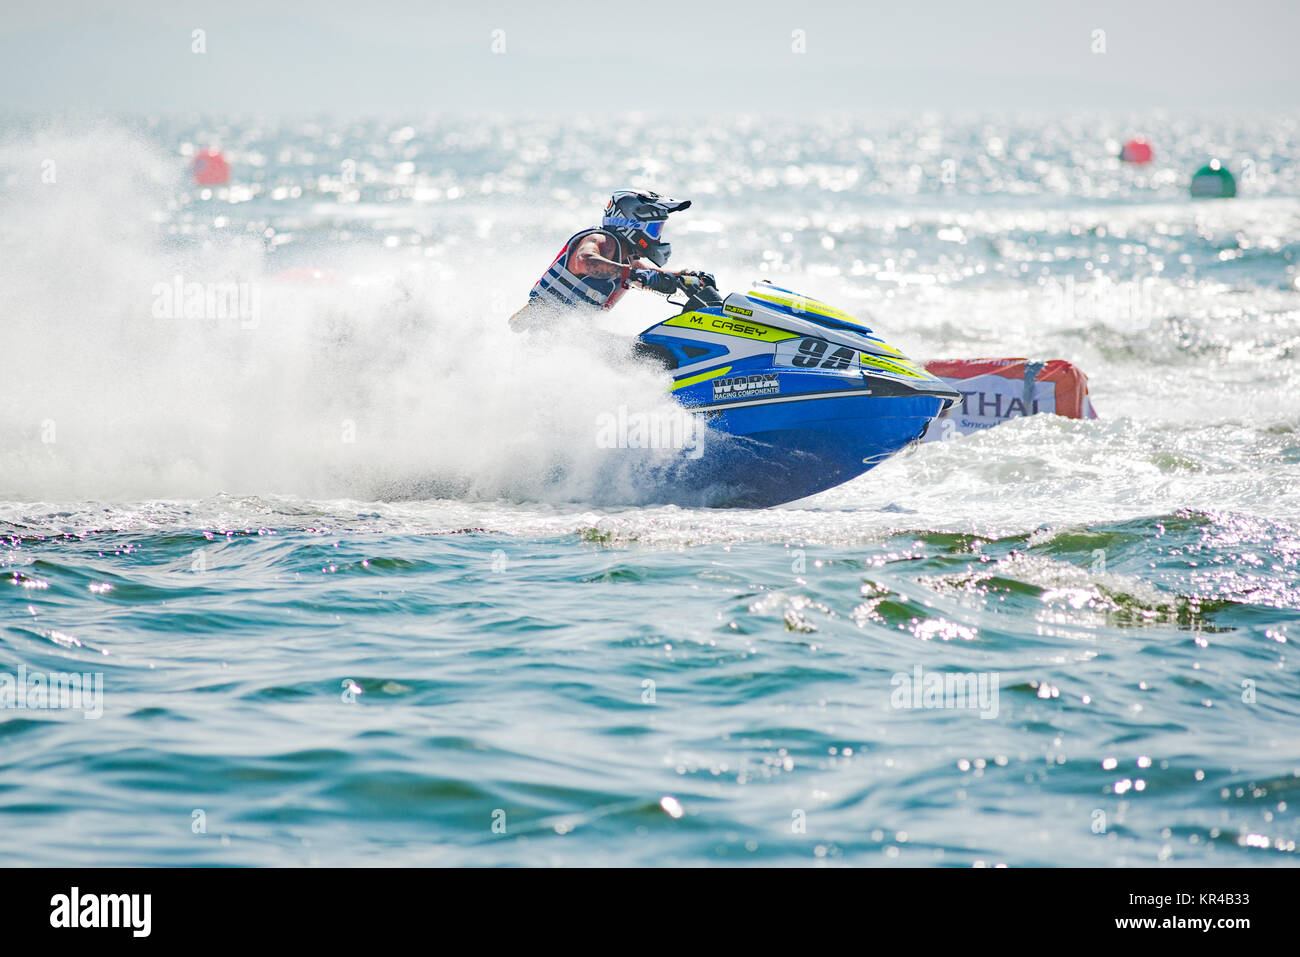 Mitchell Casey from the Australia competing in the Pro-Am Runabaout Stock class of the International Jet Ski World Cup 2017 at Jomtien Beach, Pattaya, Stock Photo